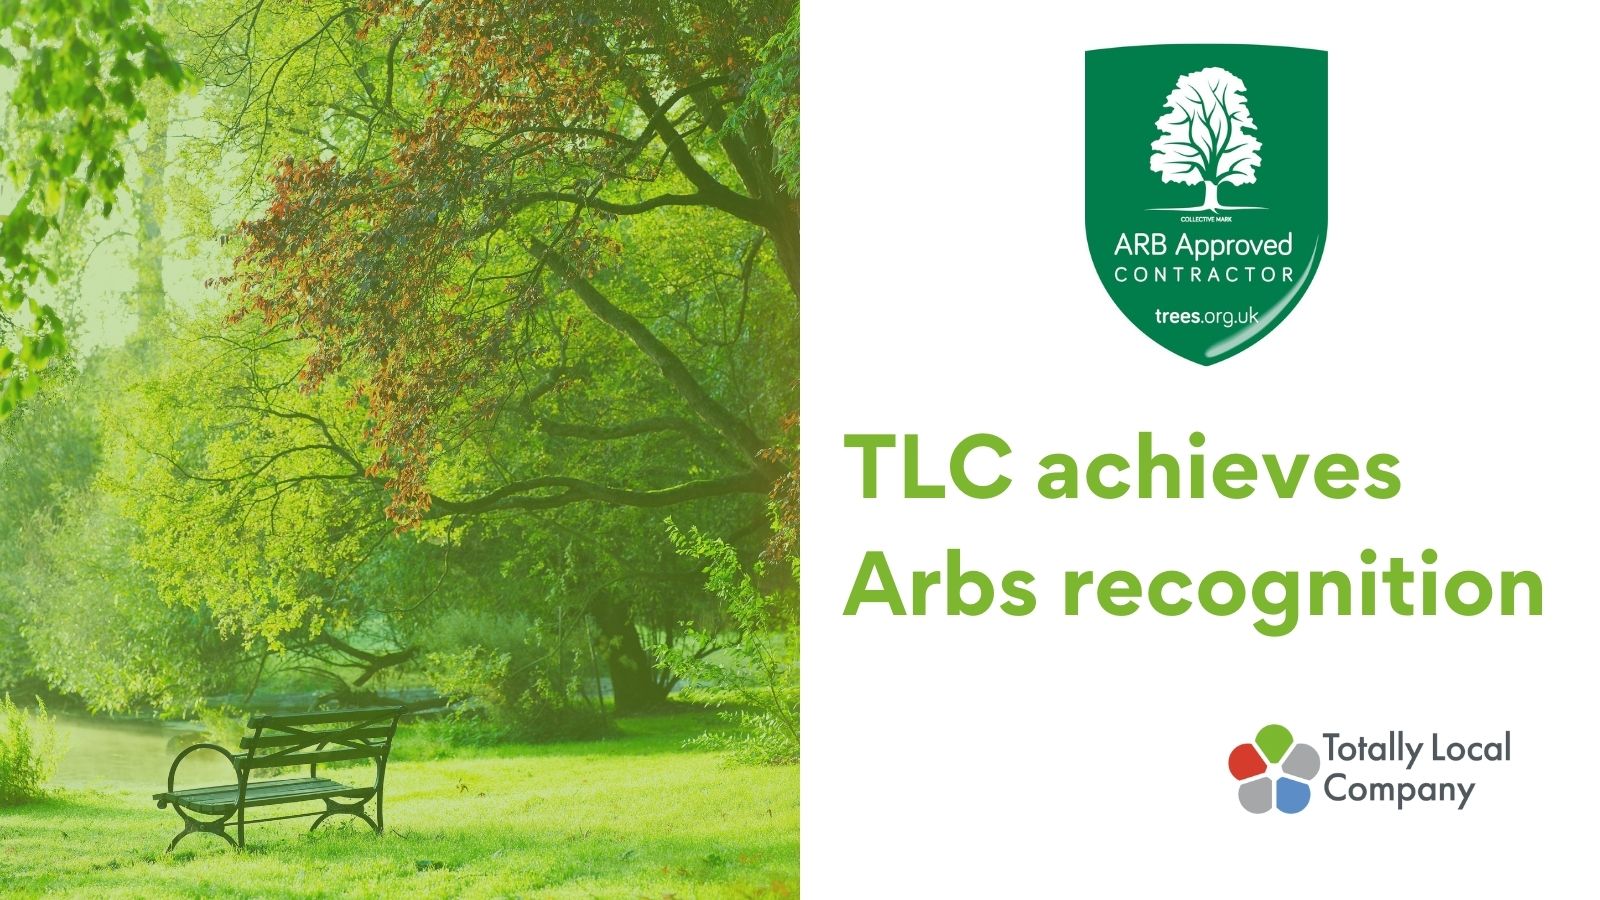 TLC successfully achieves ARB Approved Contractor status